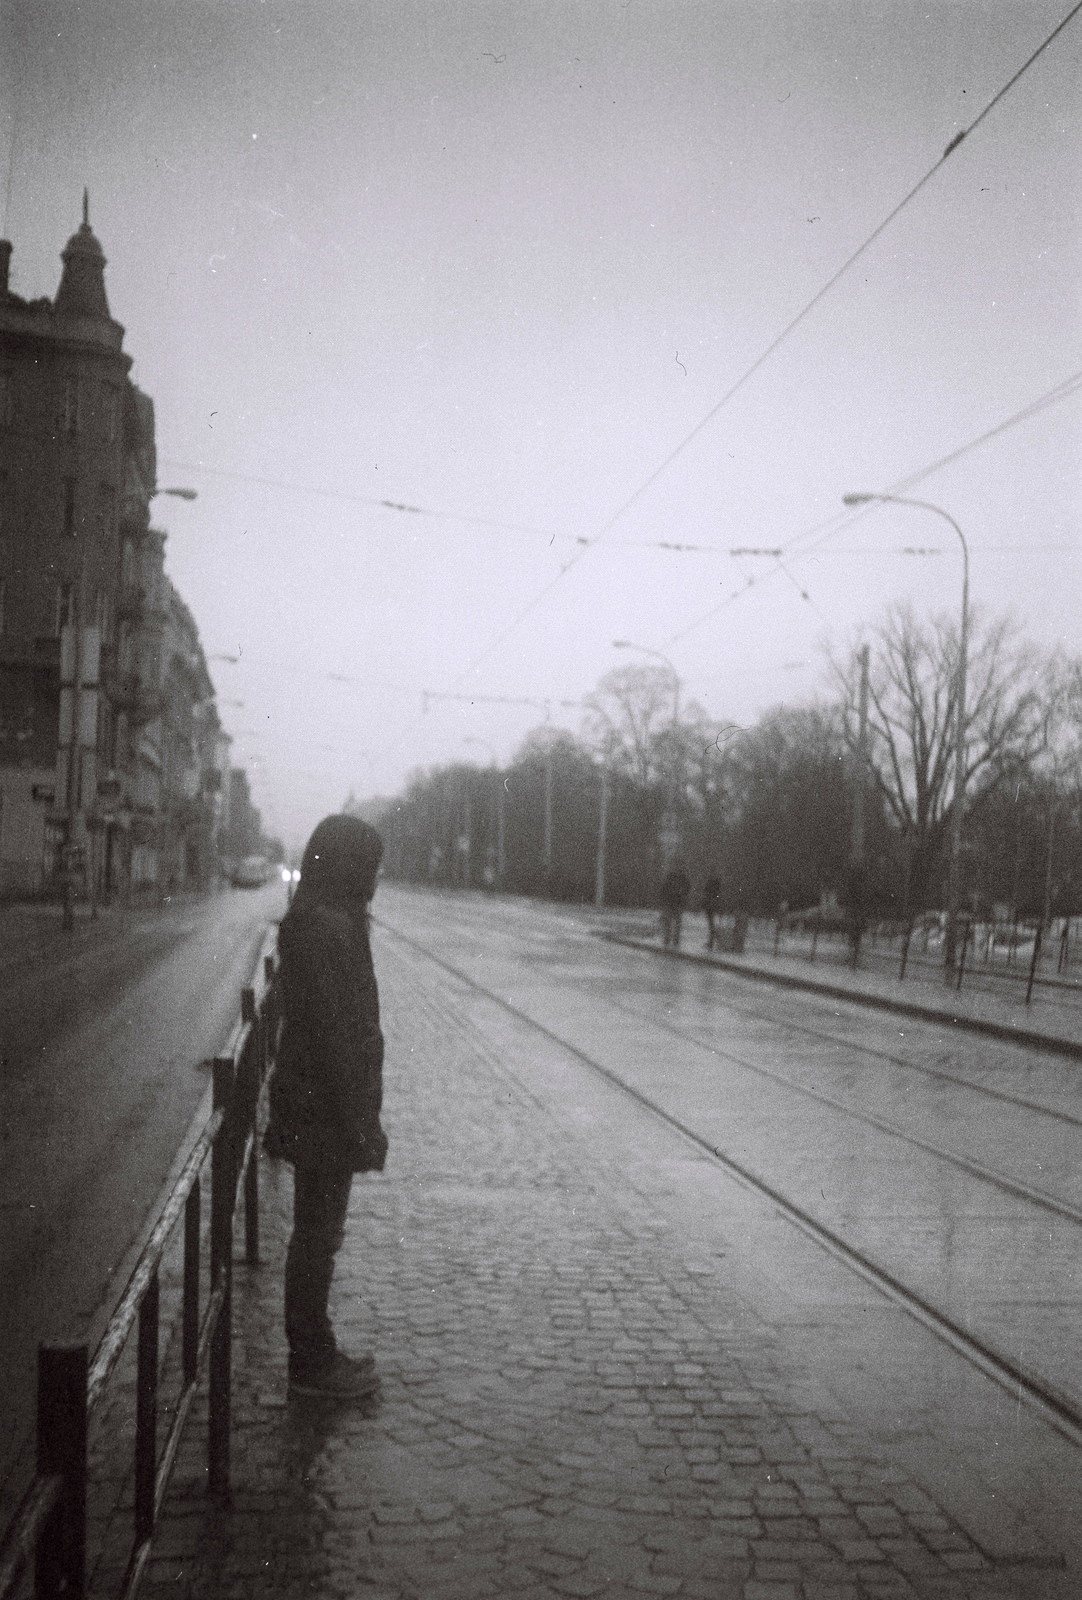 Agfa Billy Record 7.7 - Woman at Tram Stop in Rainy Day